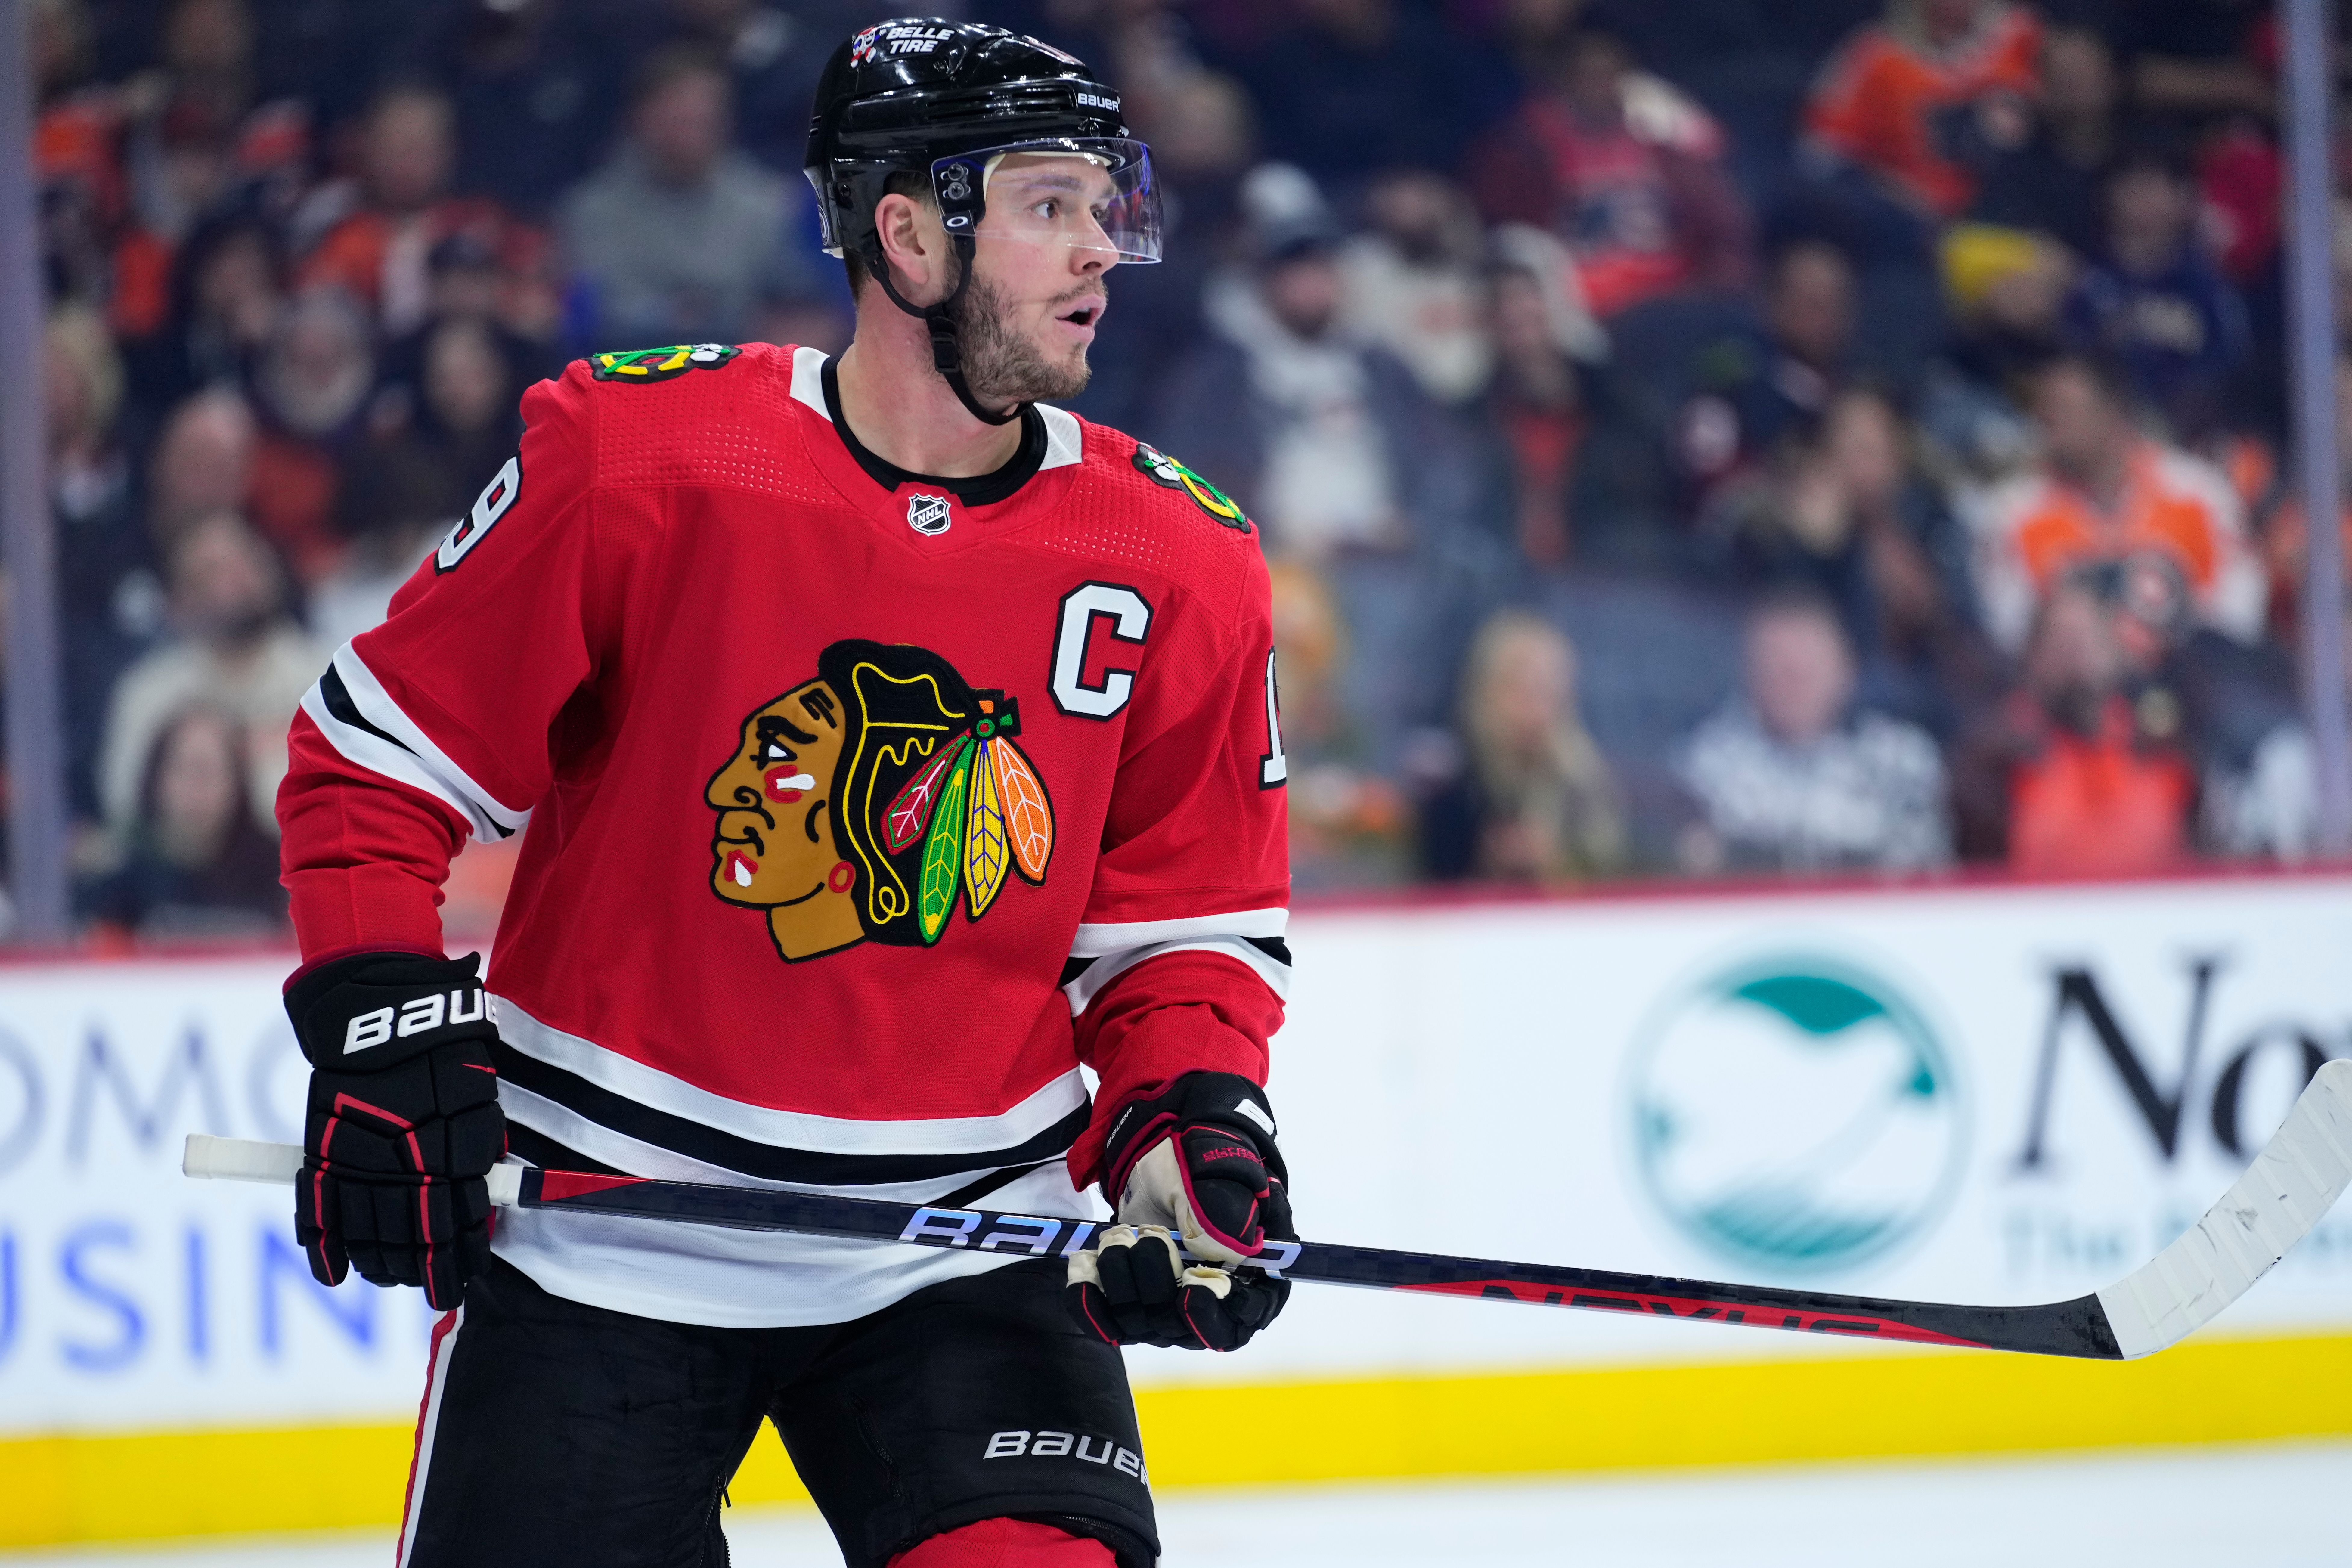 Longtime Blackhawks leader Toews says hes stepping away for health — but not retiring The Seattle Times